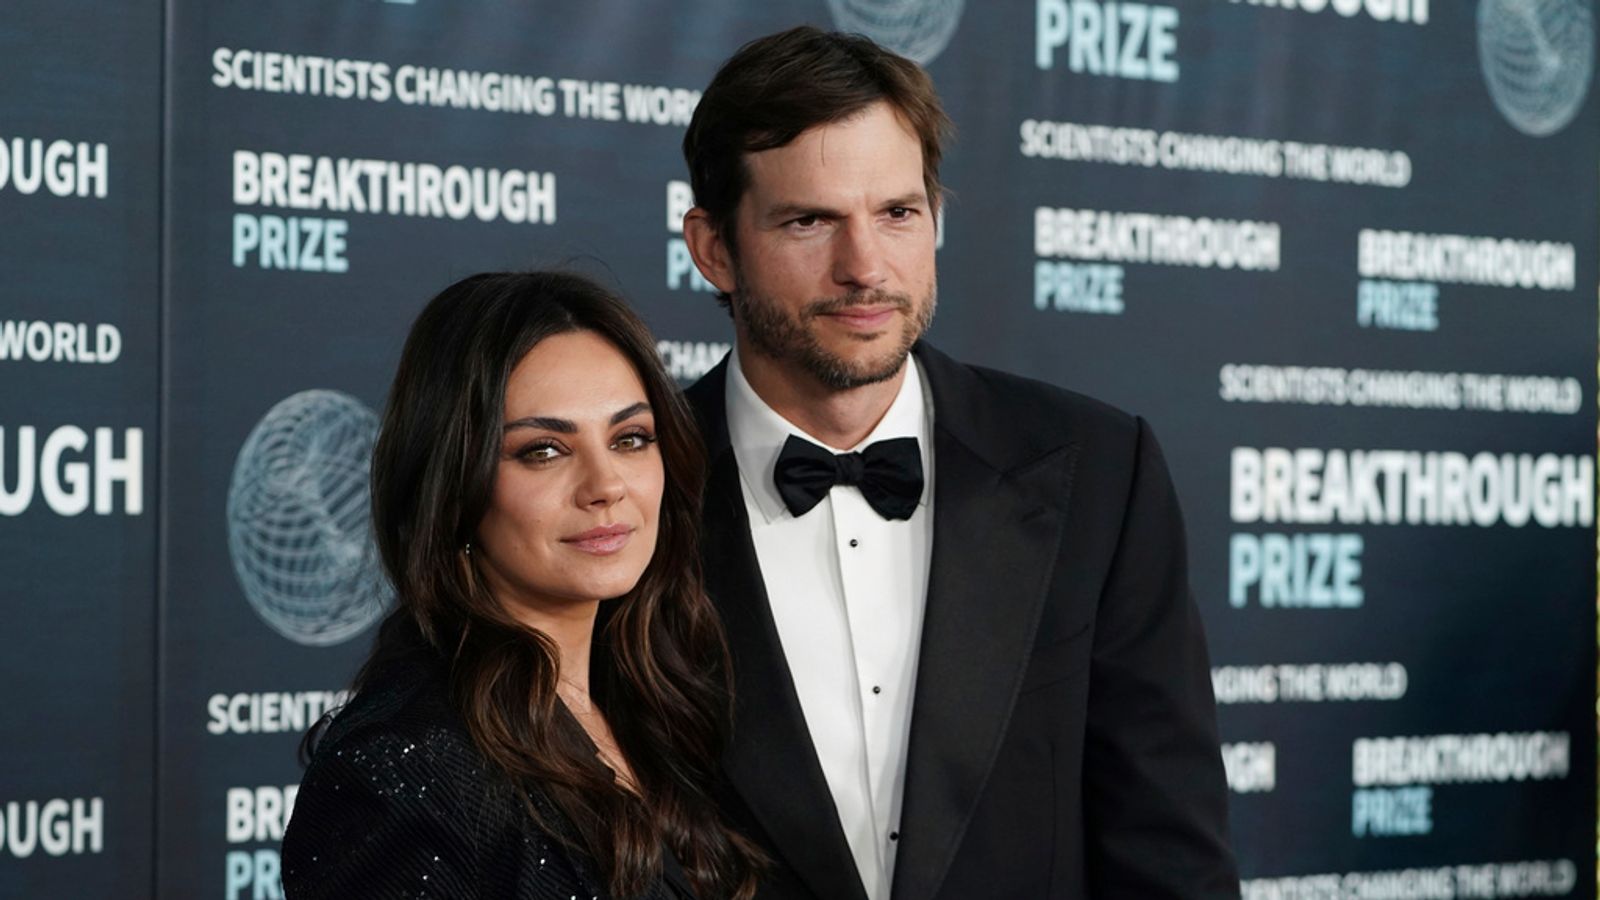 Ashton Kutcher and Mila Kunis post California beach house on Airbnb offering 'unforgettable summer stay'